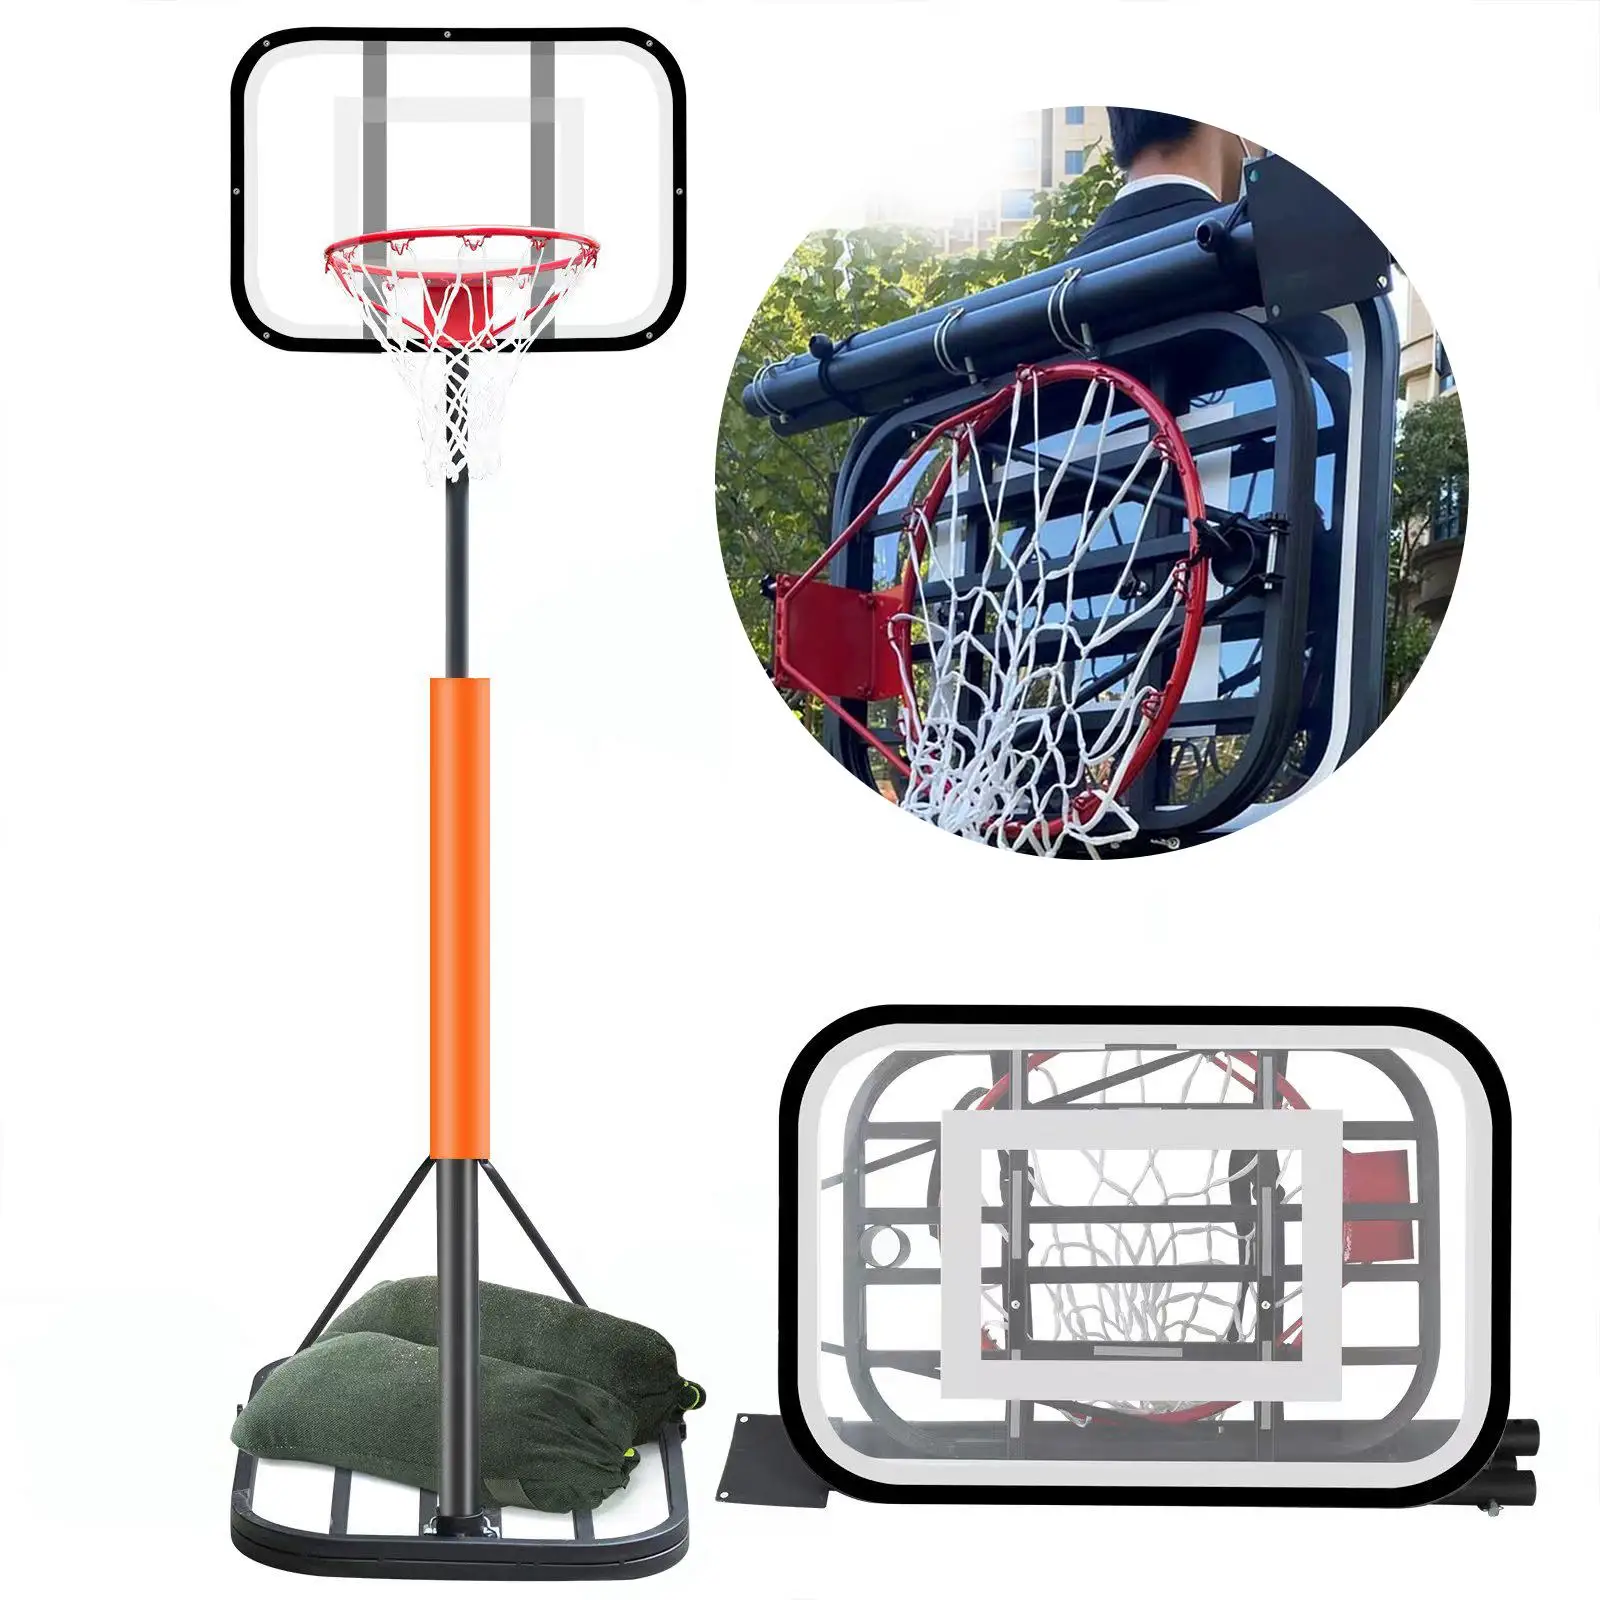 Portable Basketball Hoop Stand Adjustable Adjusts from 1.9M to 2.7M Backboard System Basketball Goal for Backyard Game Outside